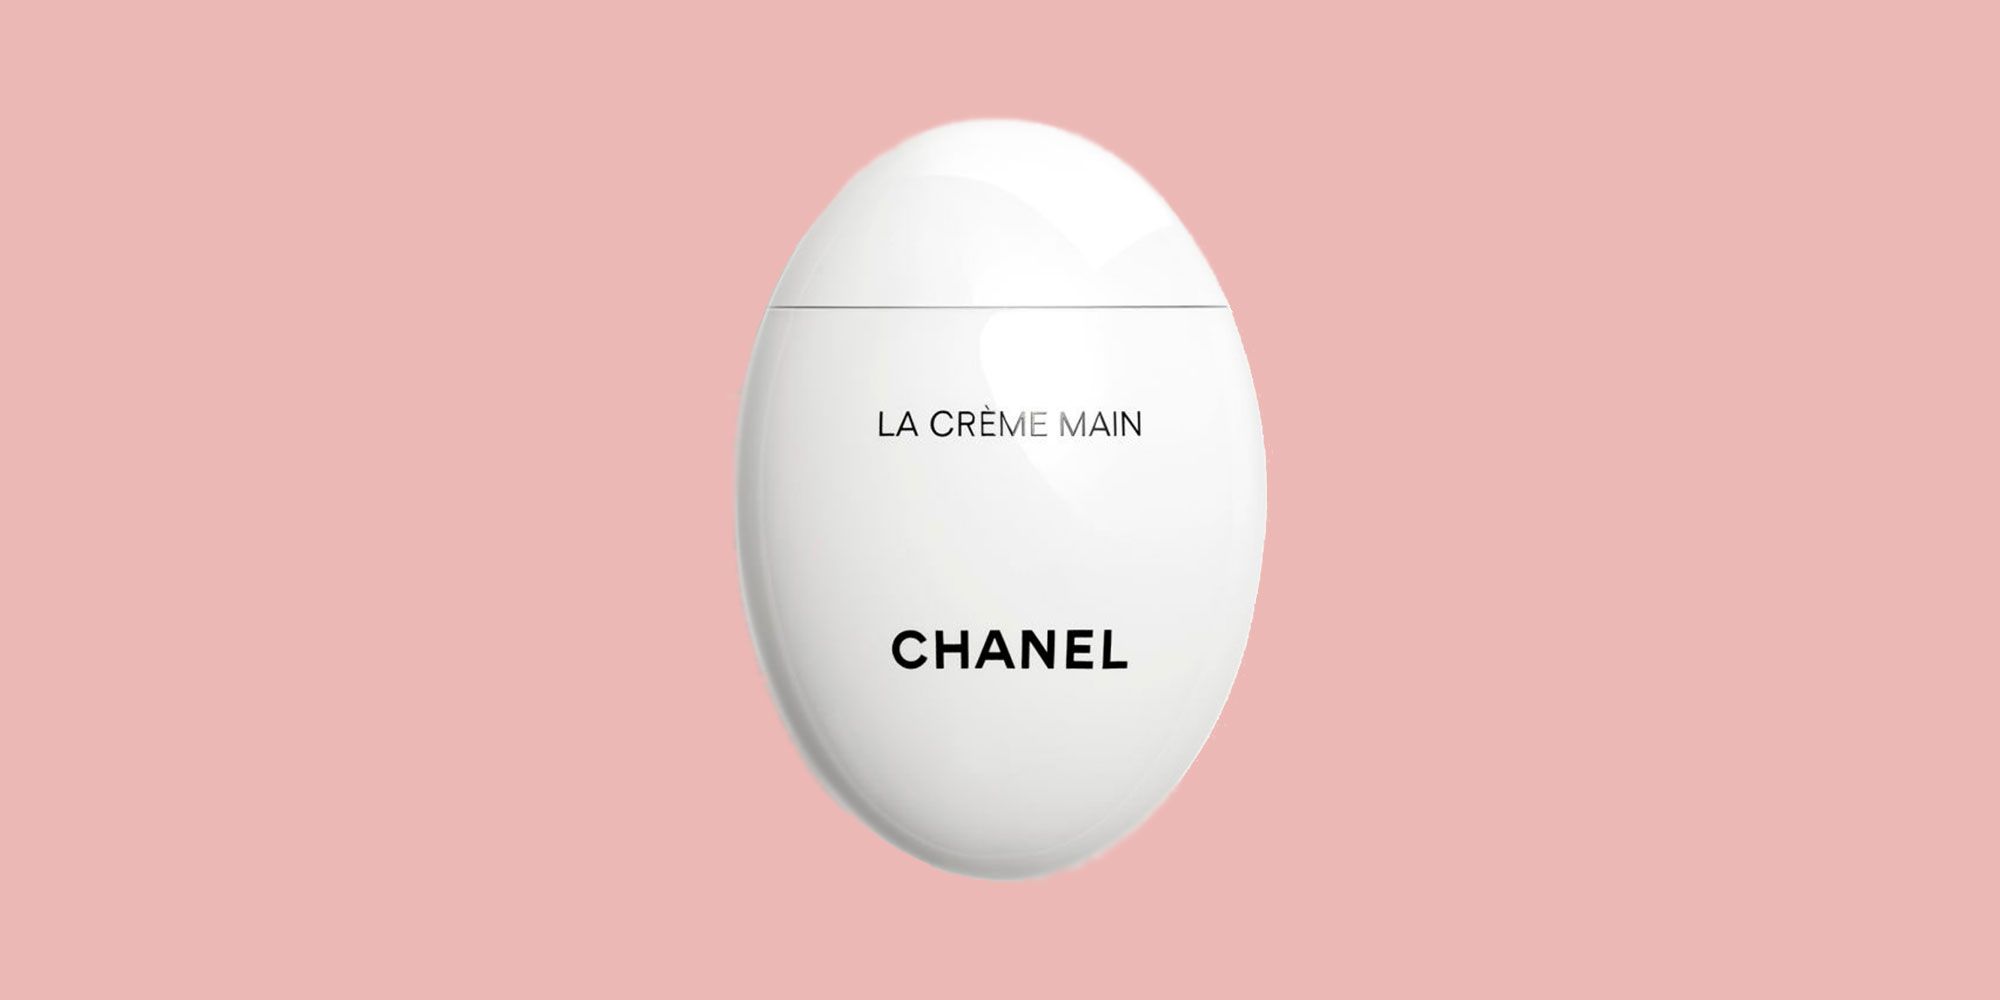 Chanel Hand Cream Review La Creme Main Texture Riche and No 5 LEau  The  Beauty Look Book